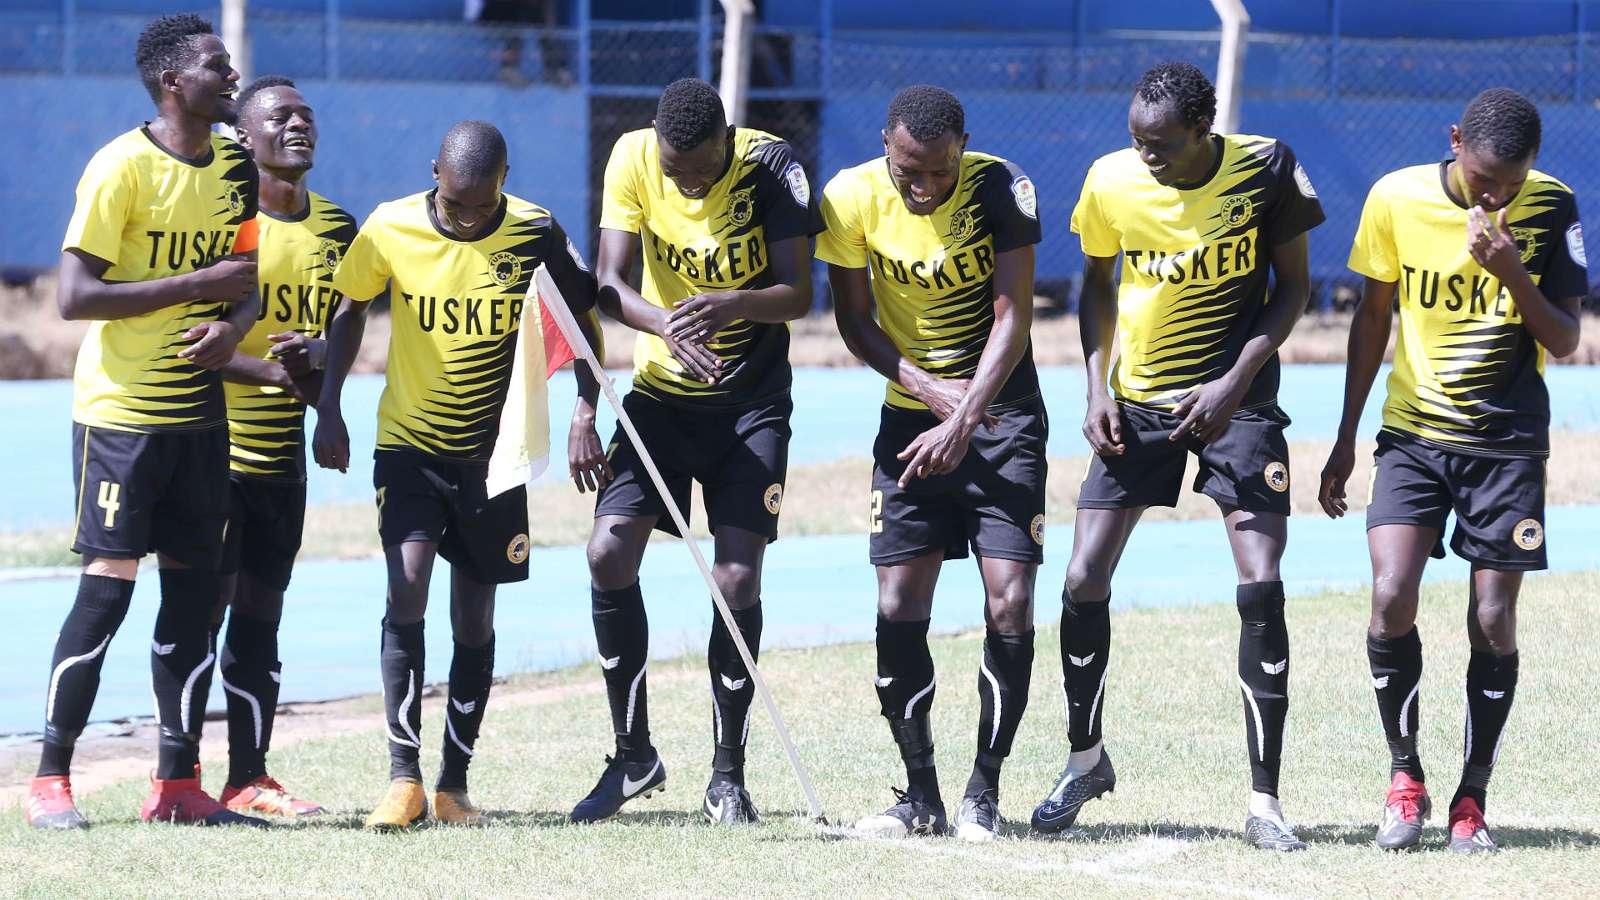 Tusker 1-0 KCB: Brewers raid Bankers to bounce back to winning ways | FKF Premier League